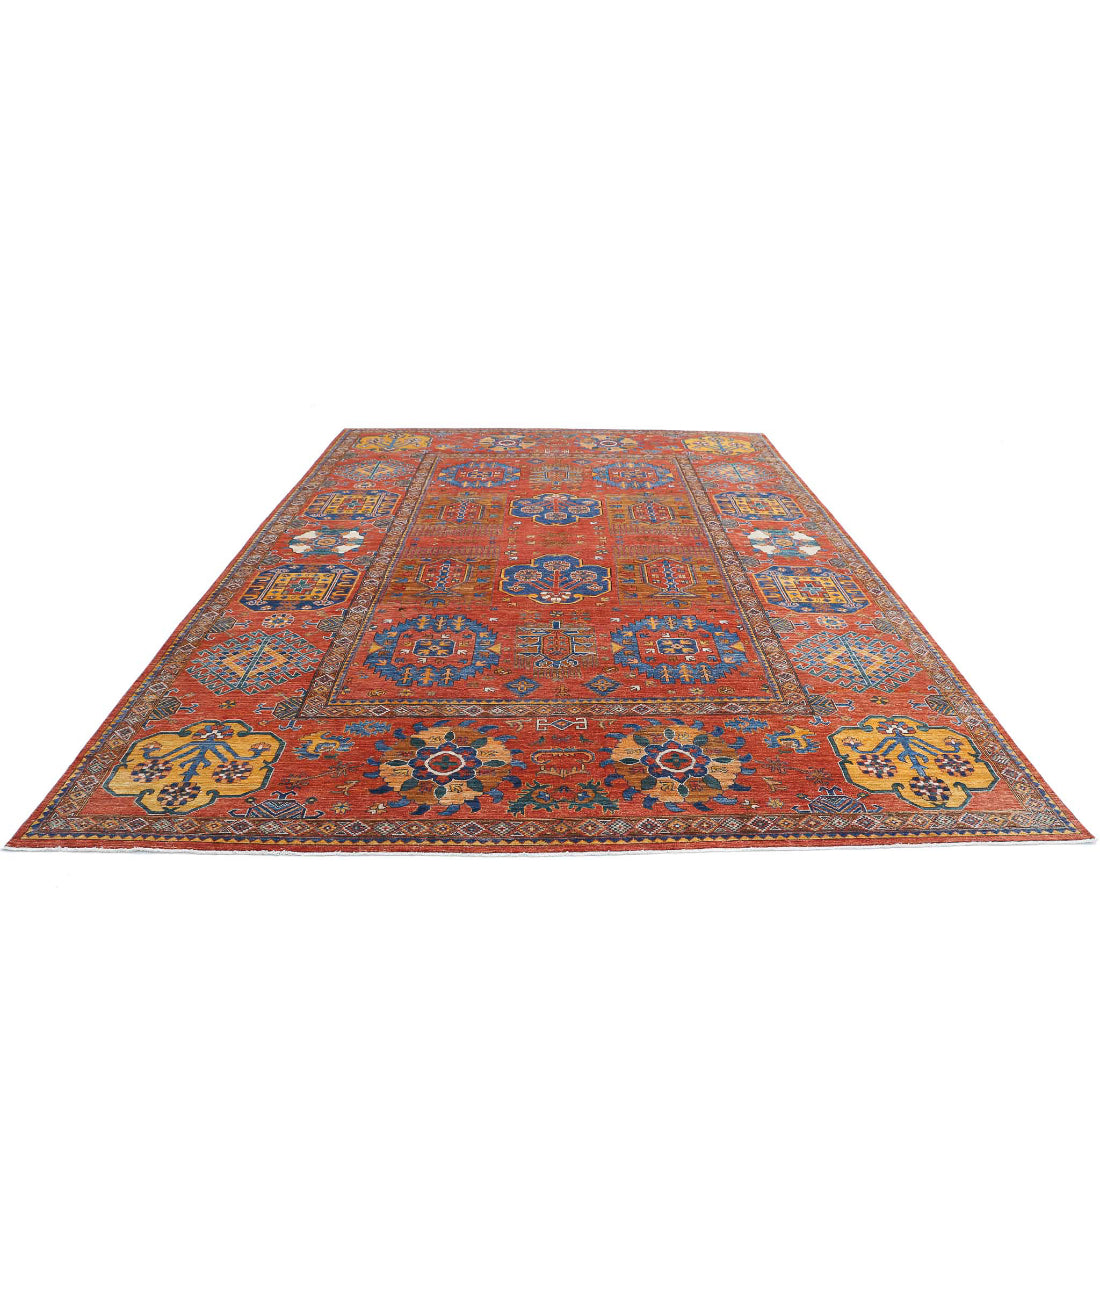 Hand Knotted Nomadic Caucasian Humna Wool Rug - 10'3'' x 14'3'' 10'3'' x 14'3'' (308 X 428) / Rust / Gold